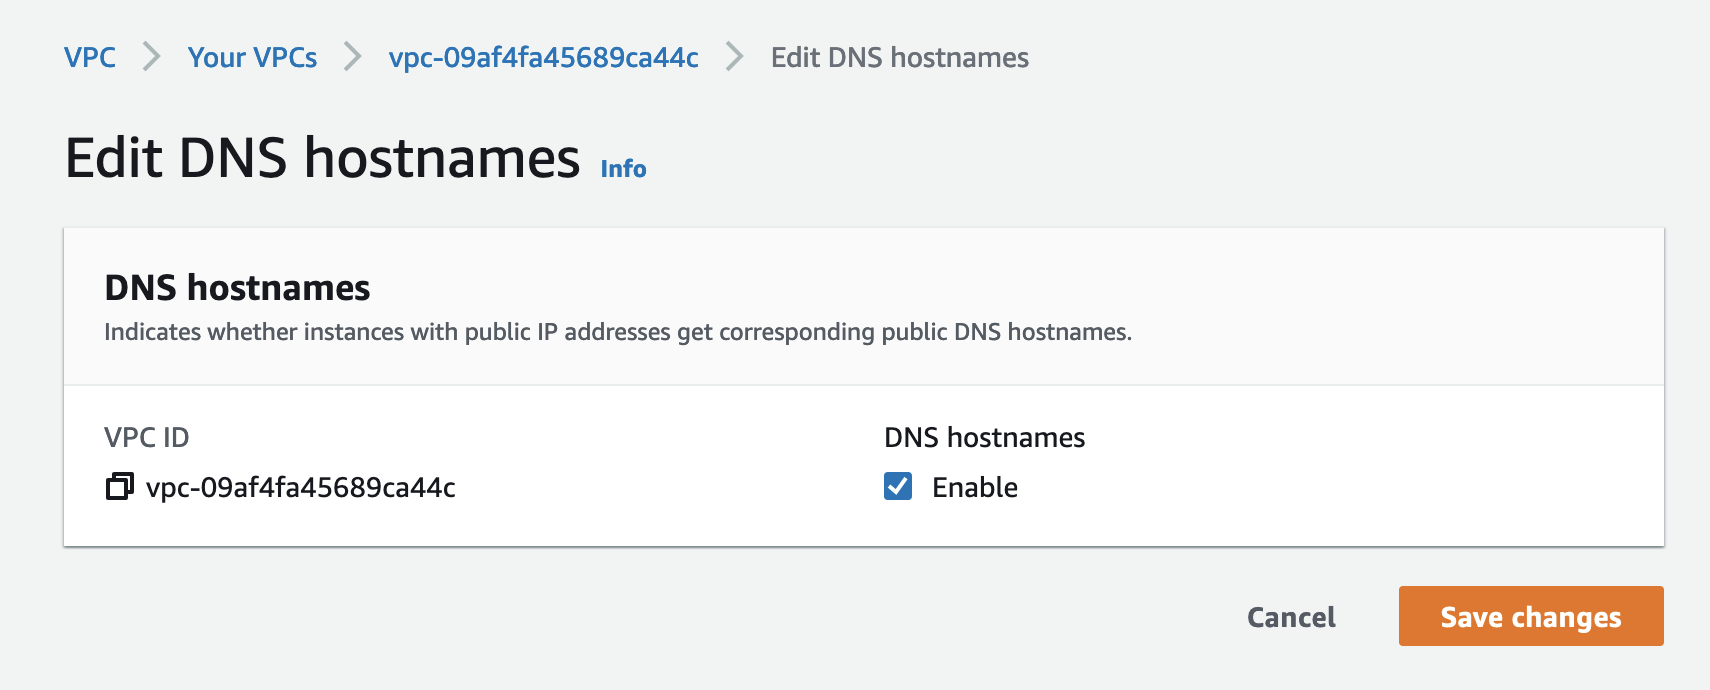 Enable DNS hostnames for the VPC.